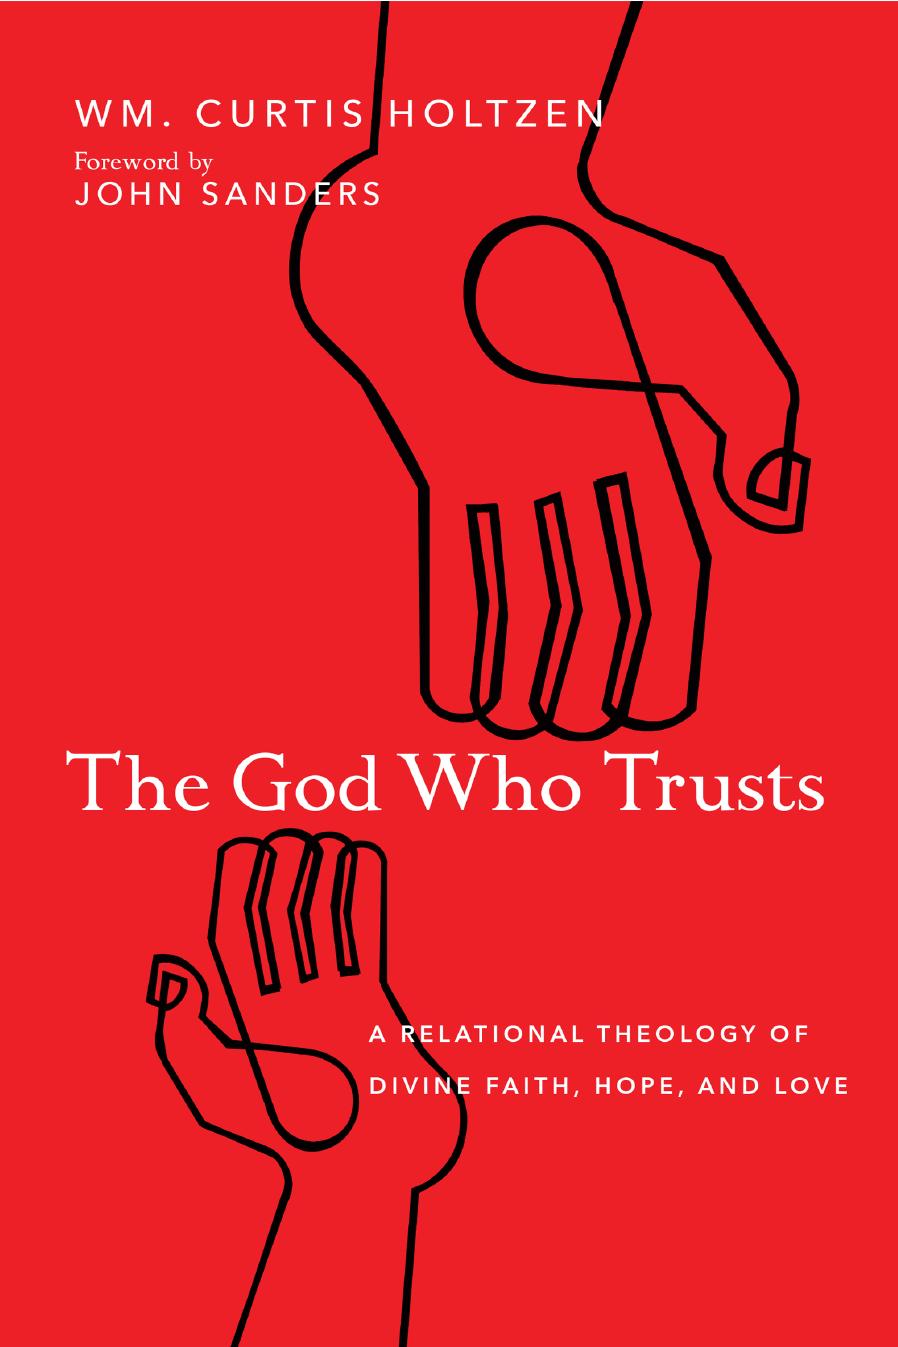 The God Who Trusts: A Relational Theology of Divine Faith, Hope, and Love by Wm. Curtis Holtzen; John Sanders